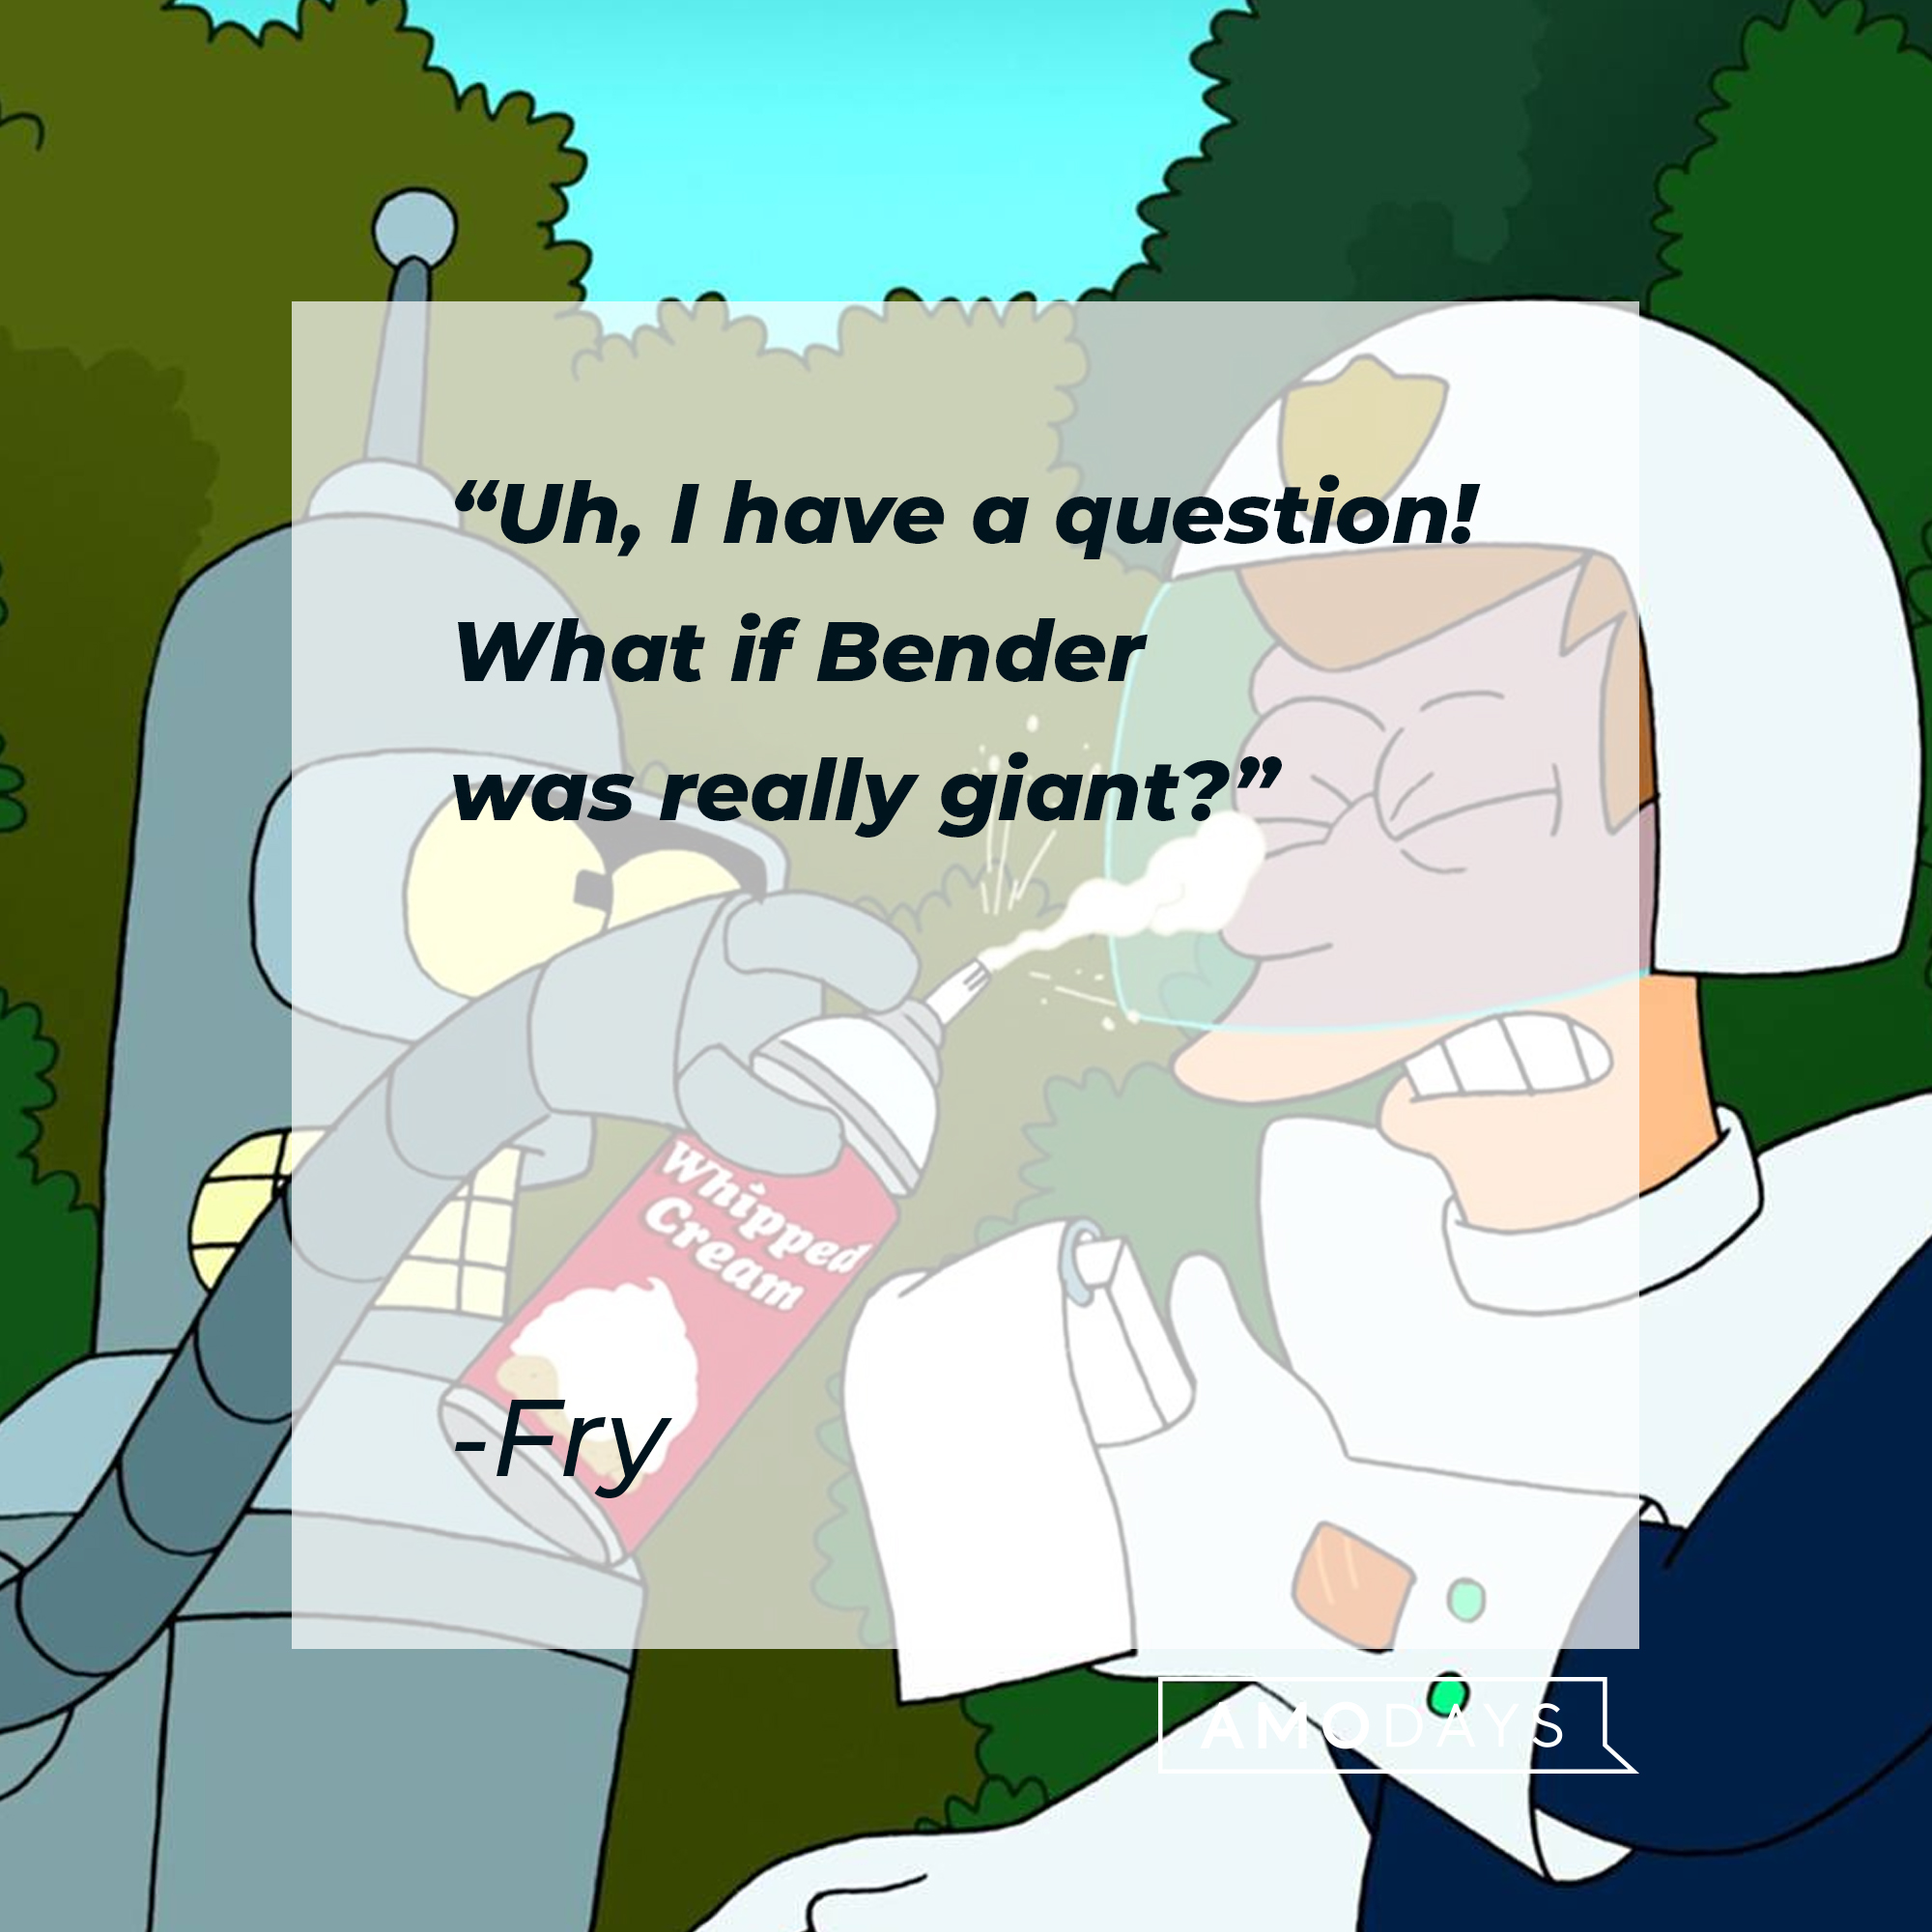 Fry Futurama's quote: "Uh,I have a question! What if Bender was really giant?" | Source: Facebook.com/Futurama